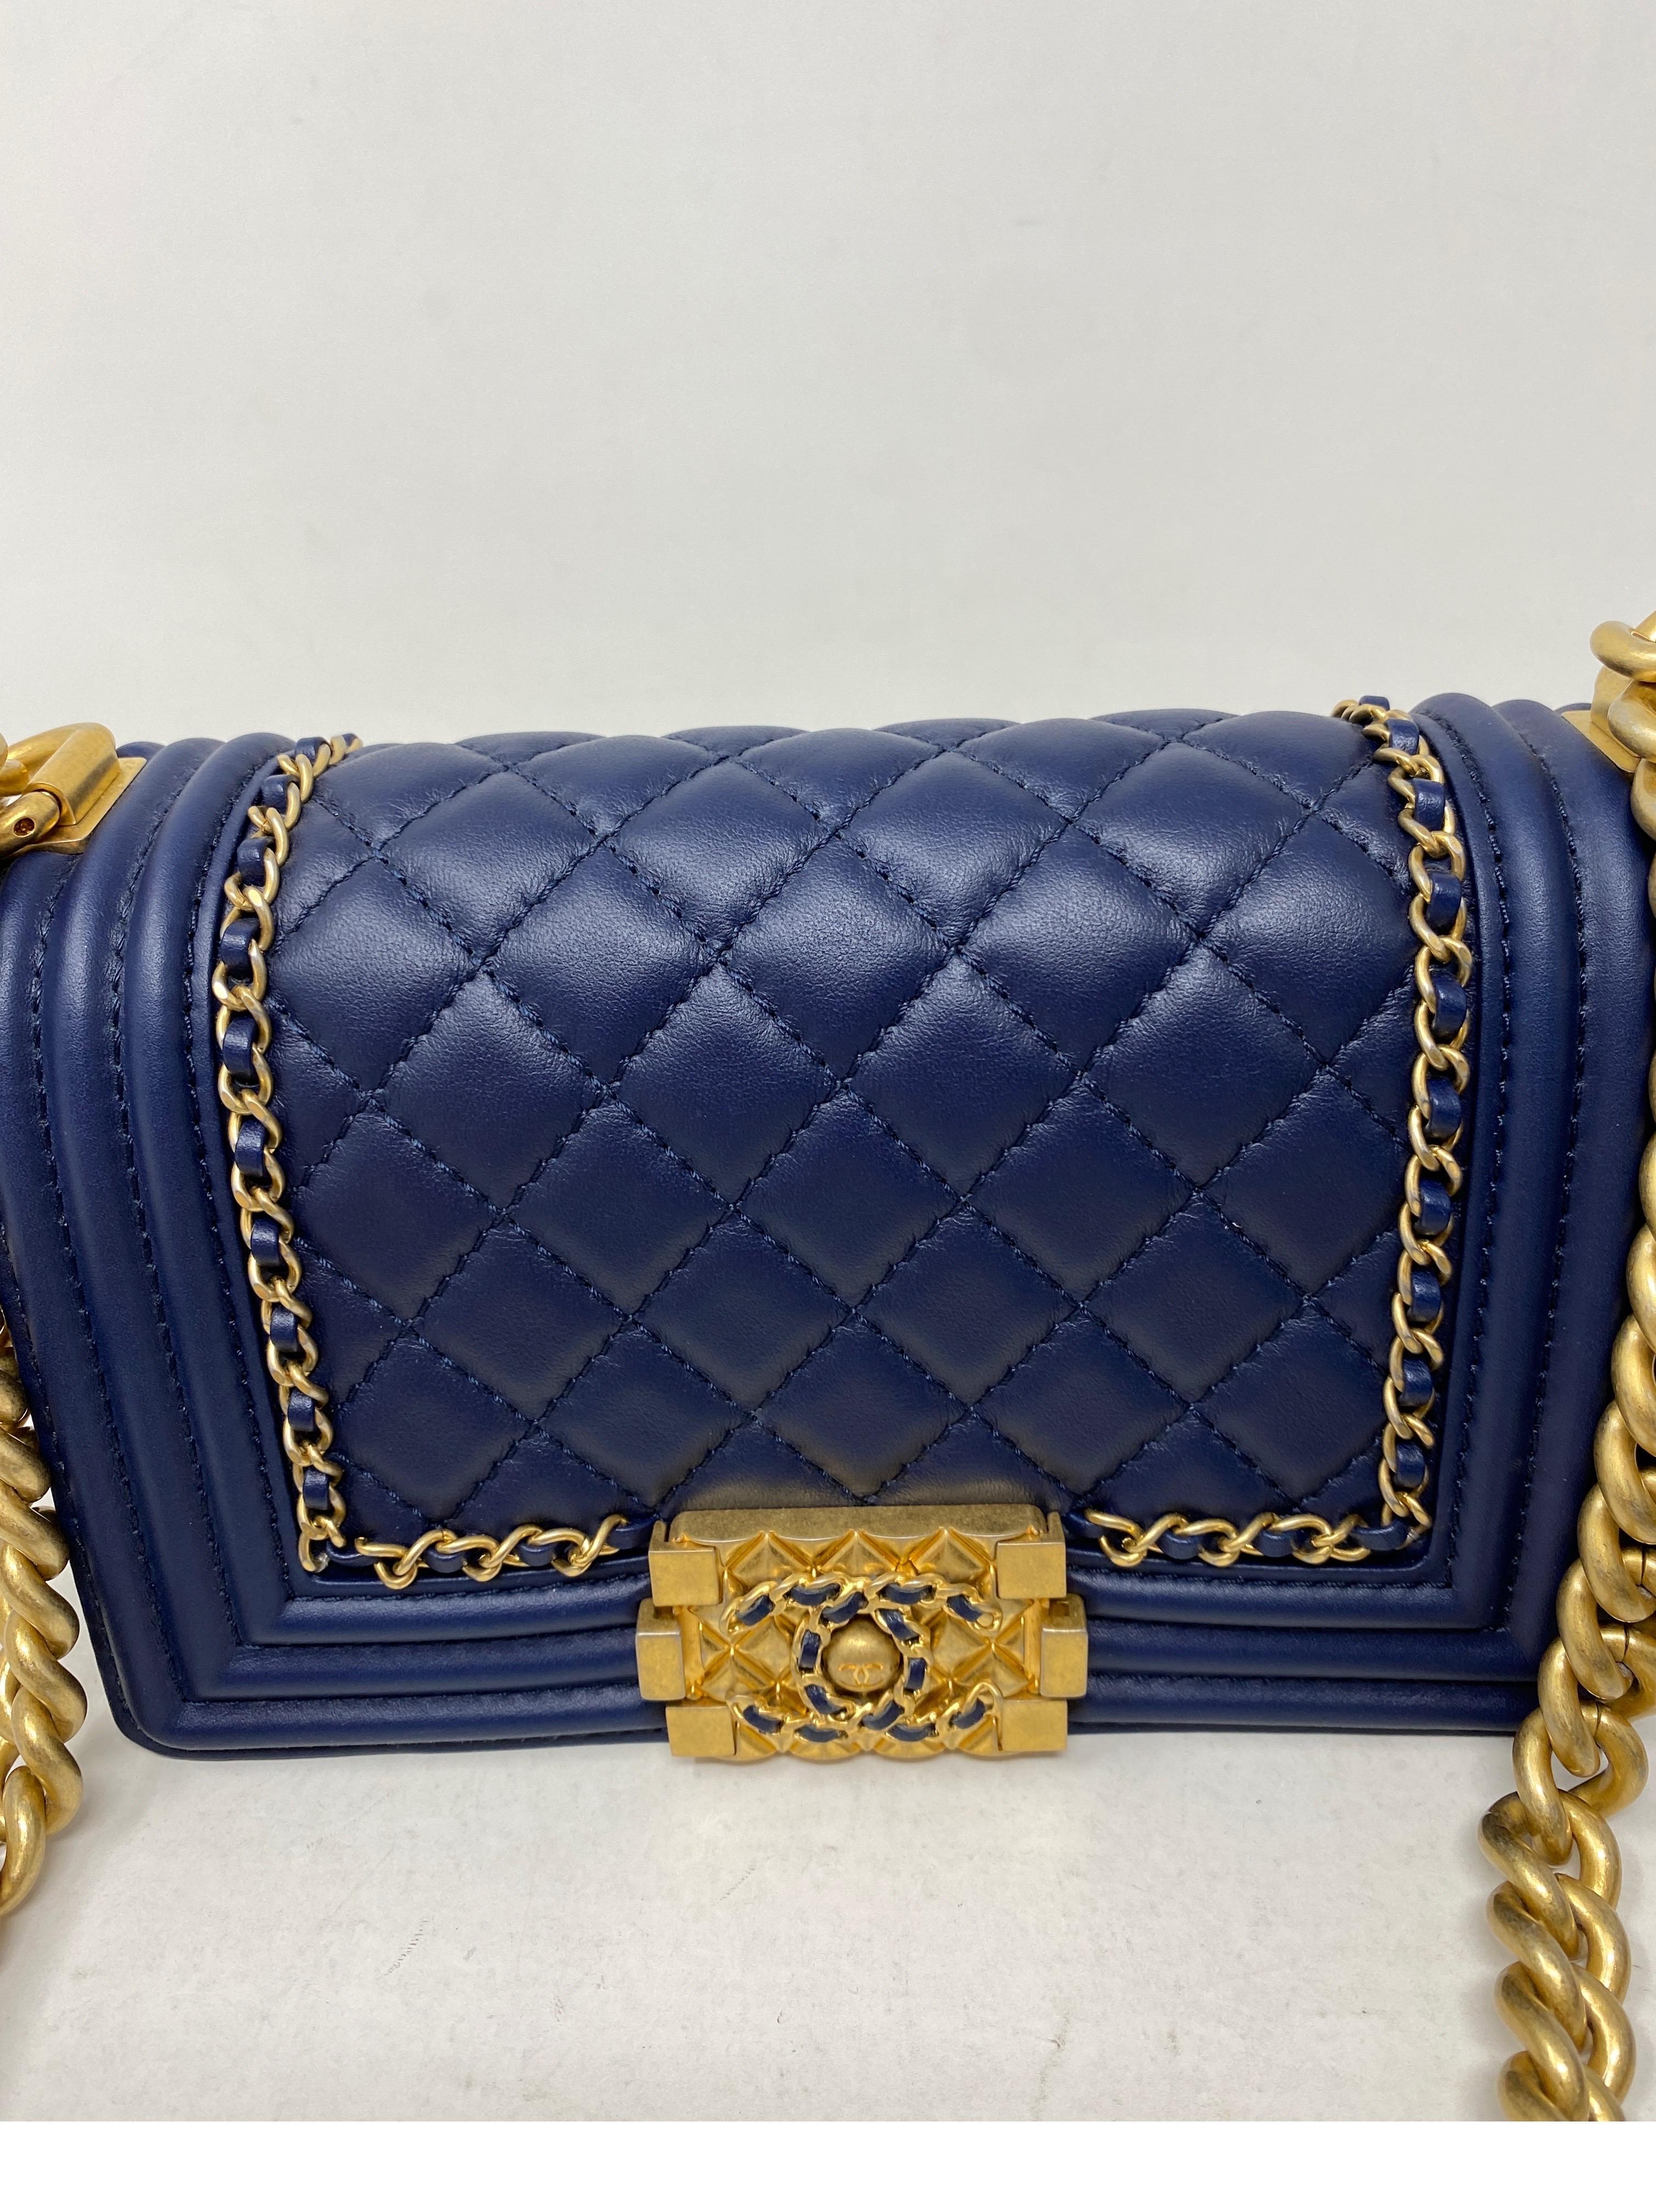 Women's or Men's Chanel Mini Boy Limited Edition Navy Bag